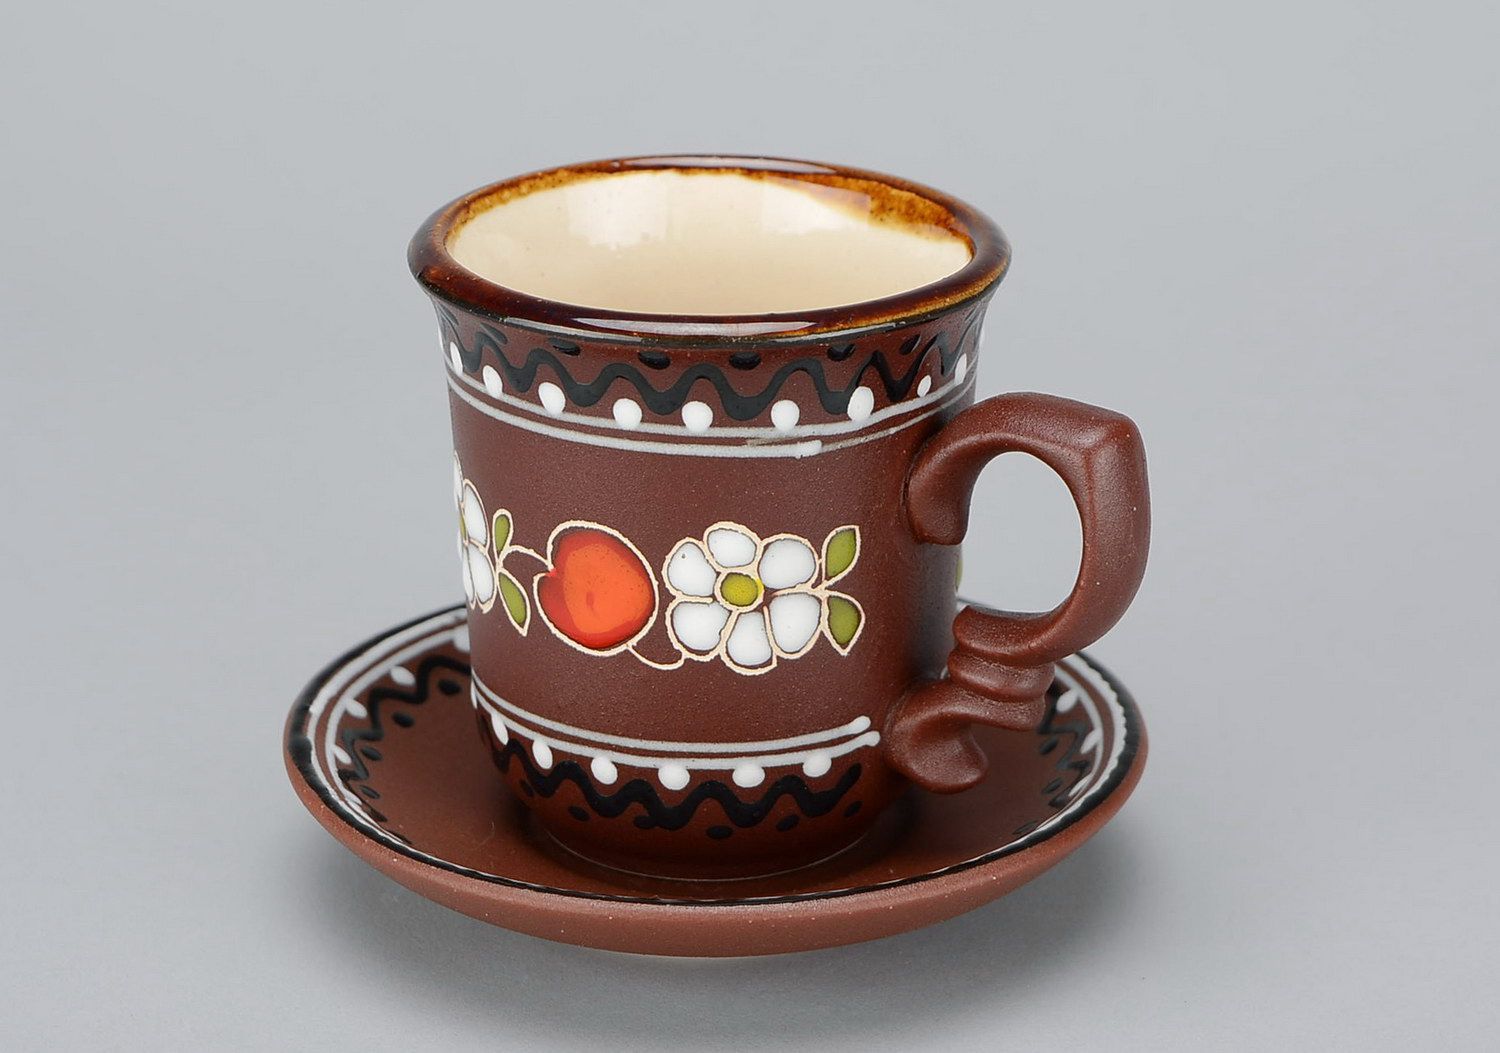 2 oz ceramic glazed decorative brown espresso cup with handle, saucer, and floral pattern photo 1